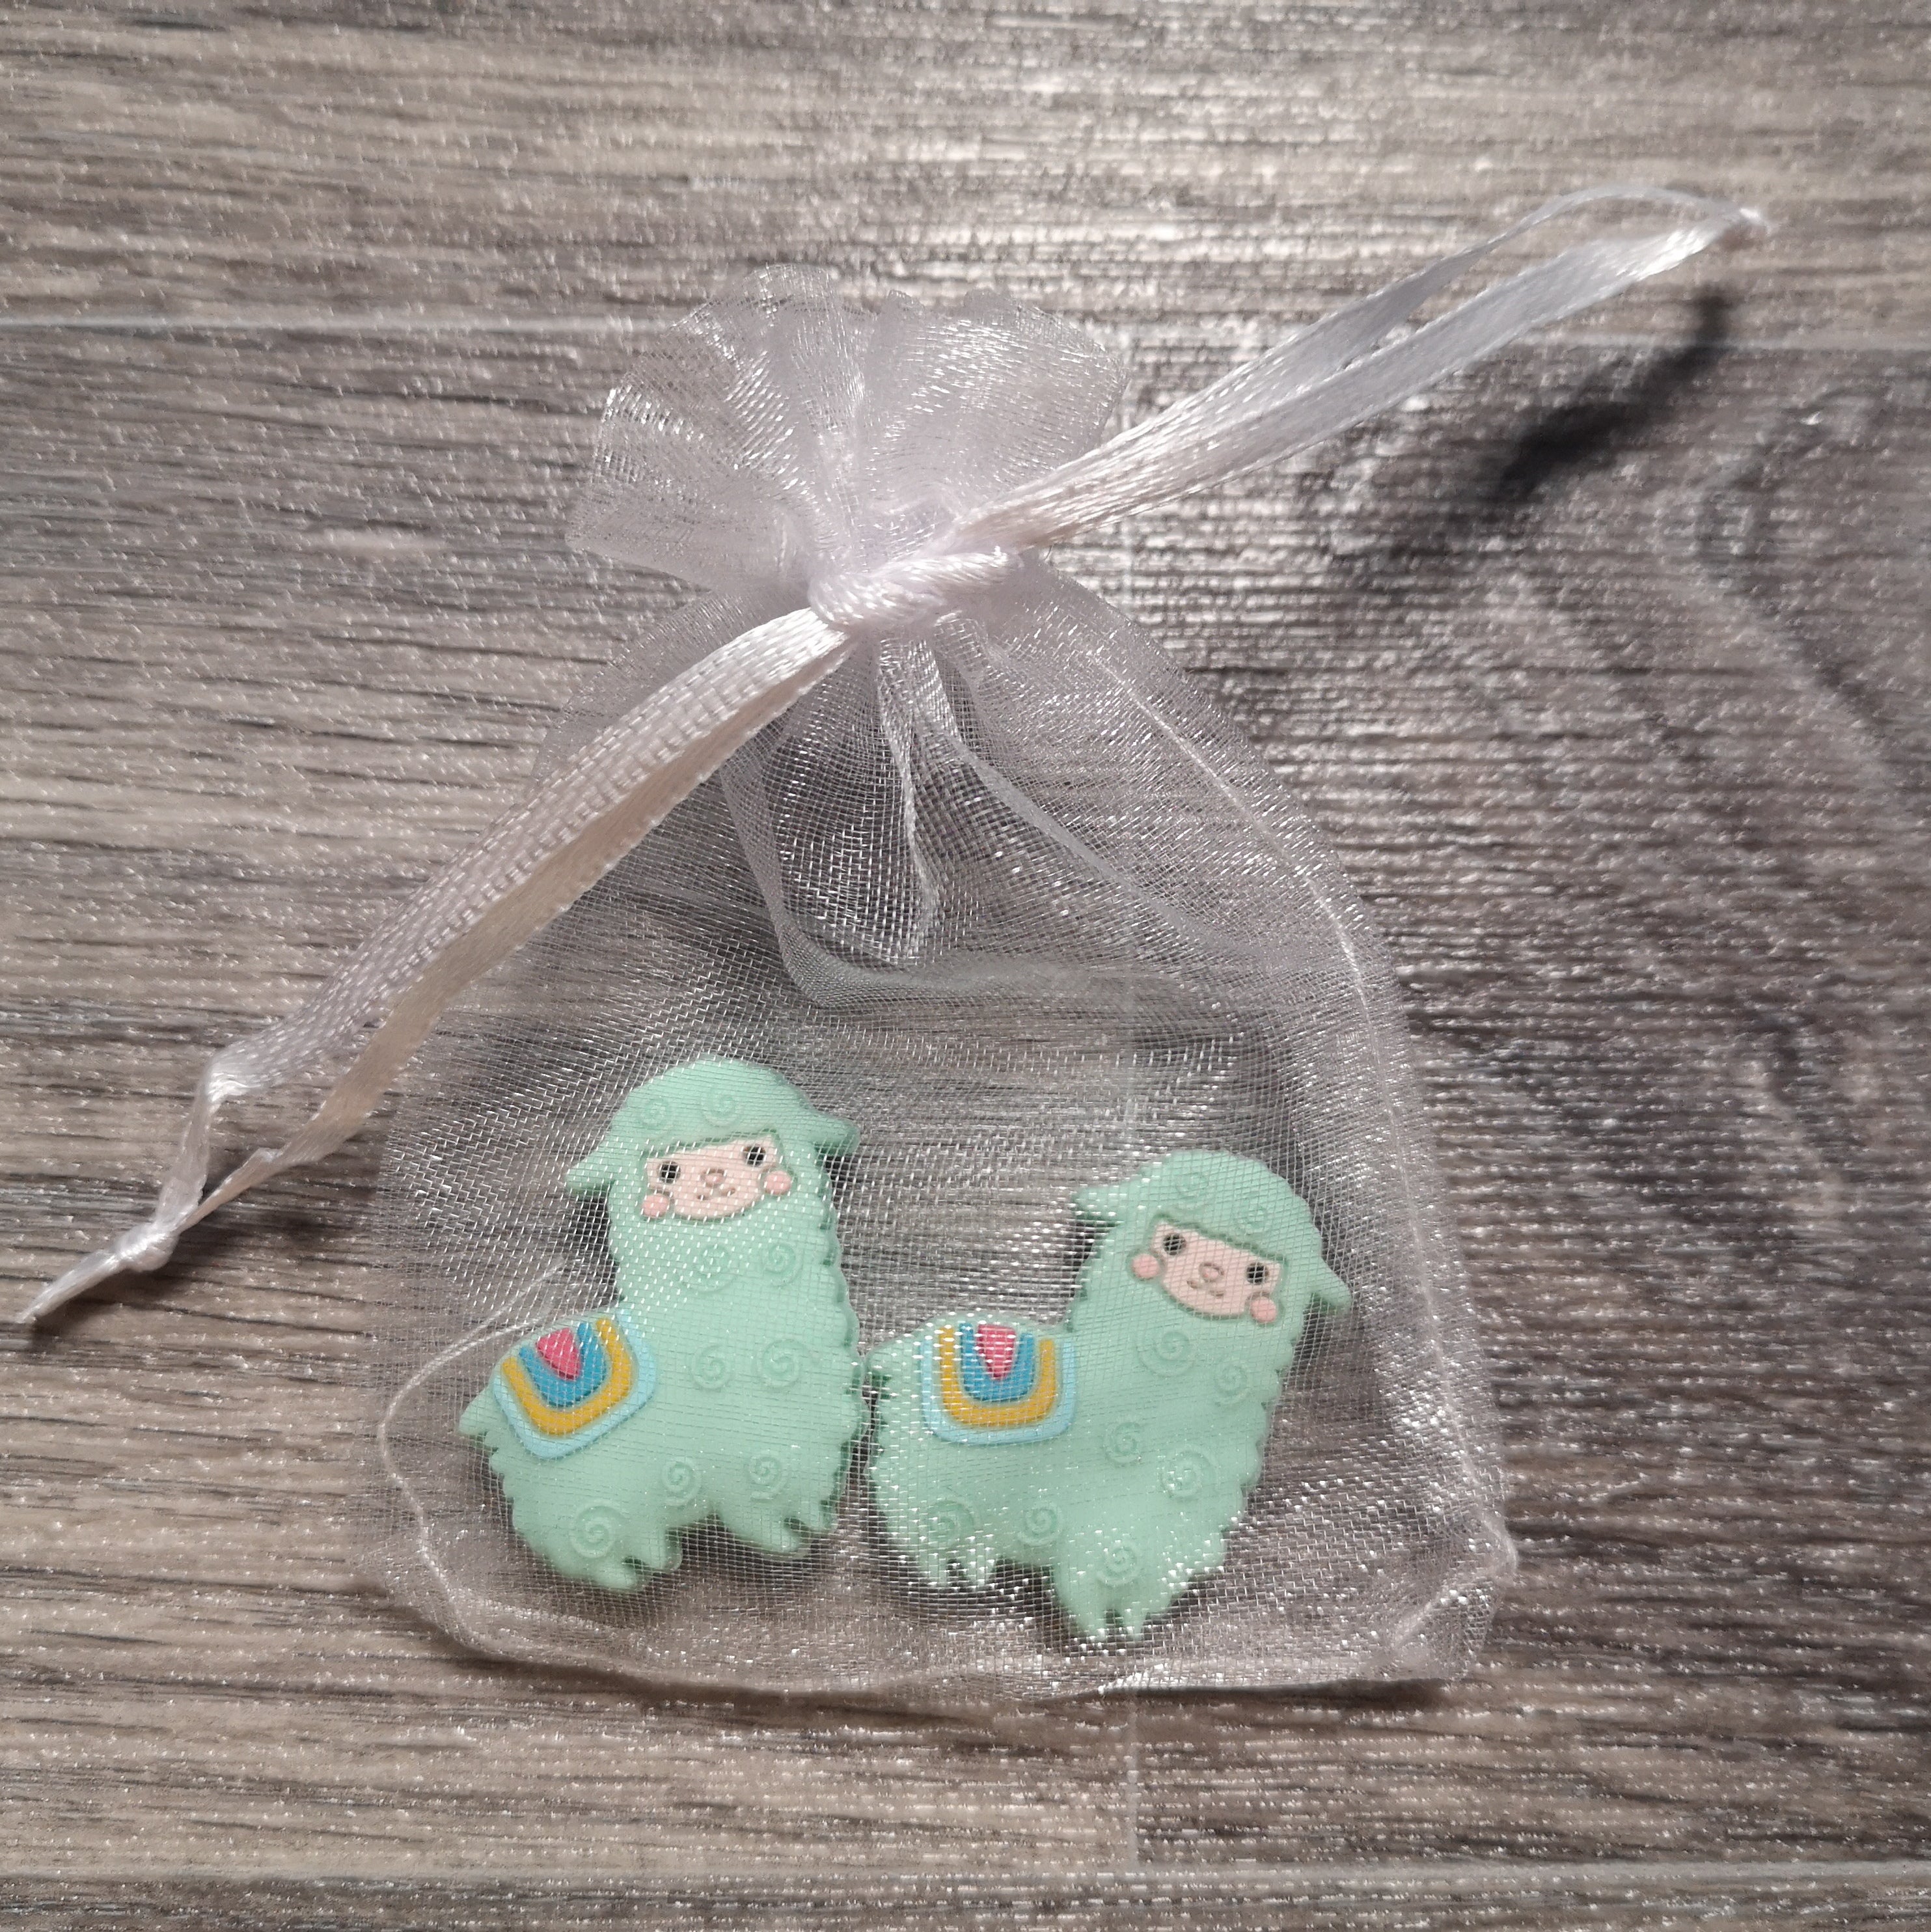 Mint alpaca needle stoppers in organza bag